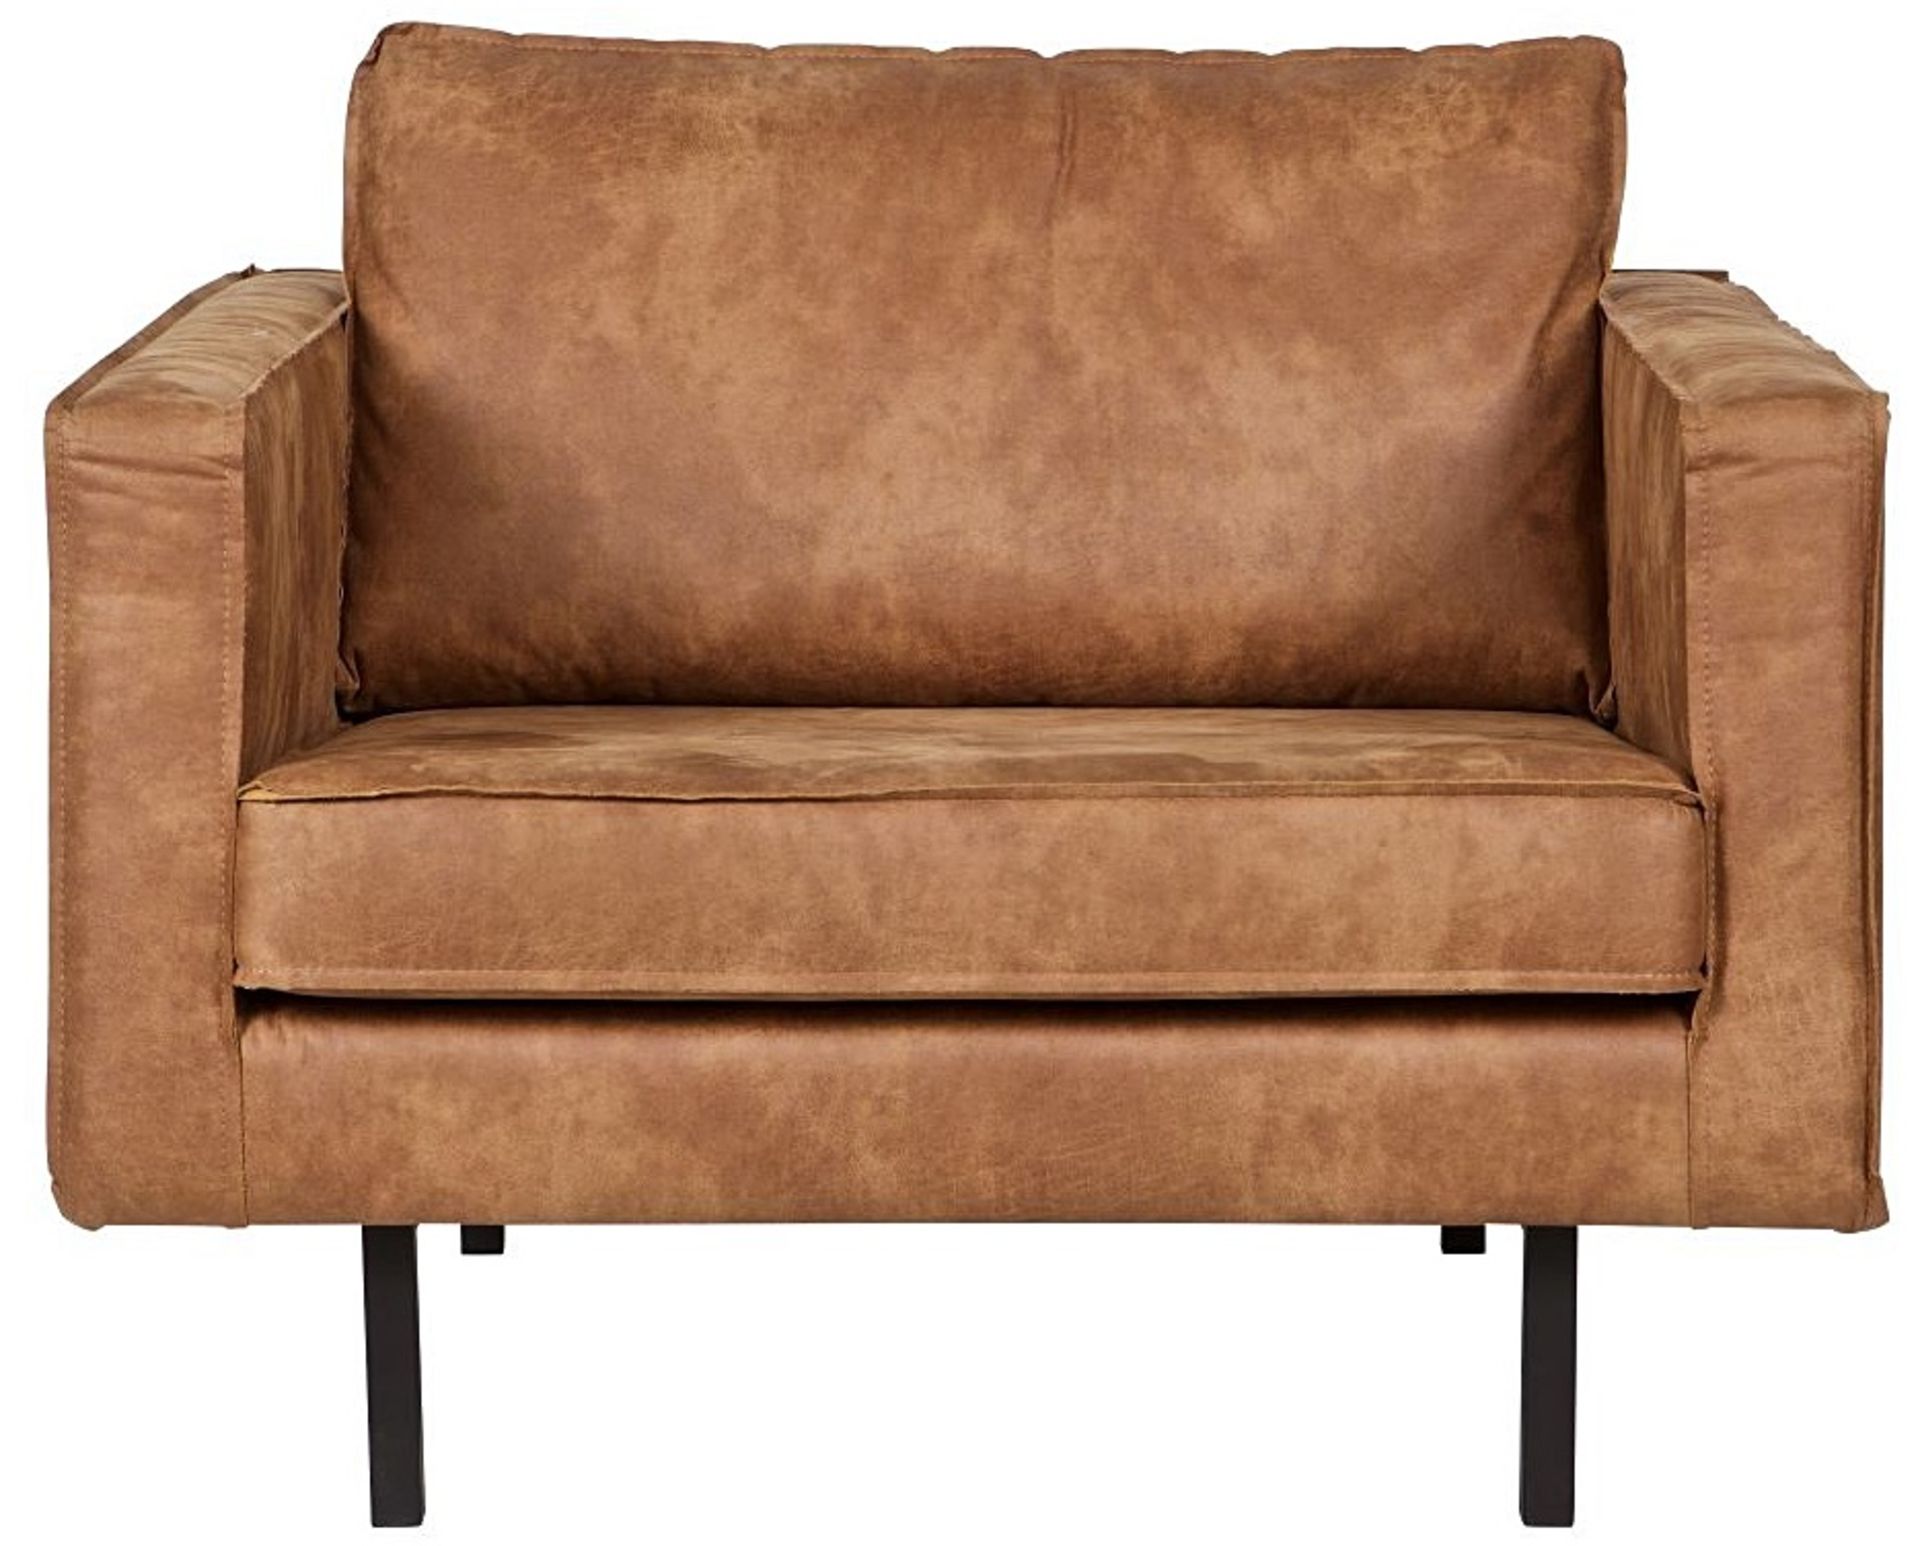 1 x 'Rodeo' Contemporary Leather Armchair In Cognac Brown - Dimensions: H:85 x W:277 x D:86 cm - - Image 4 of 4